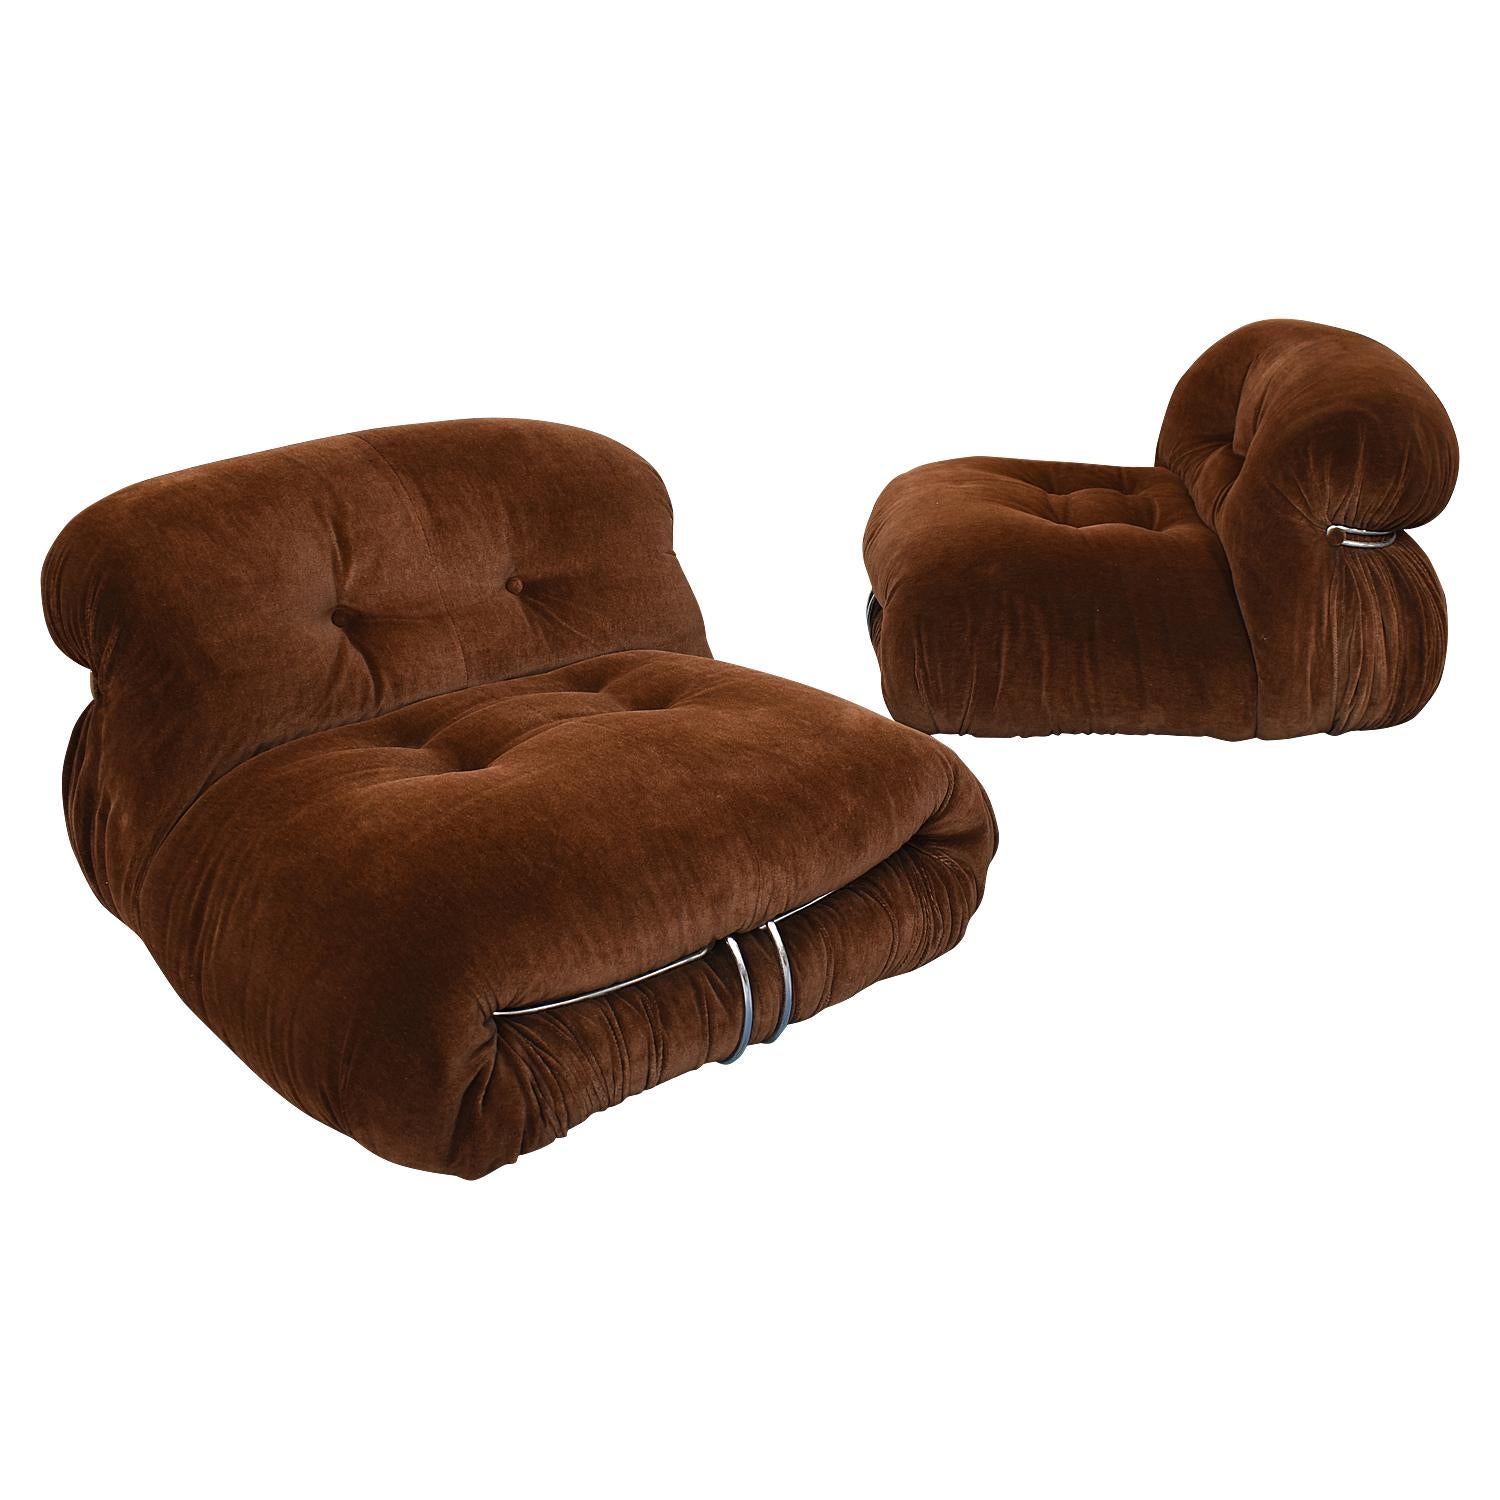 Soriana sofa and lounge chairs by Afra and Tobia Scarpa for Cassina, Italy, circa 1970.

Original dark brown mohair velvet fabric. Very hard to find (in good condition), certainly as a set.

Also available:

chaise lounge in fabric for